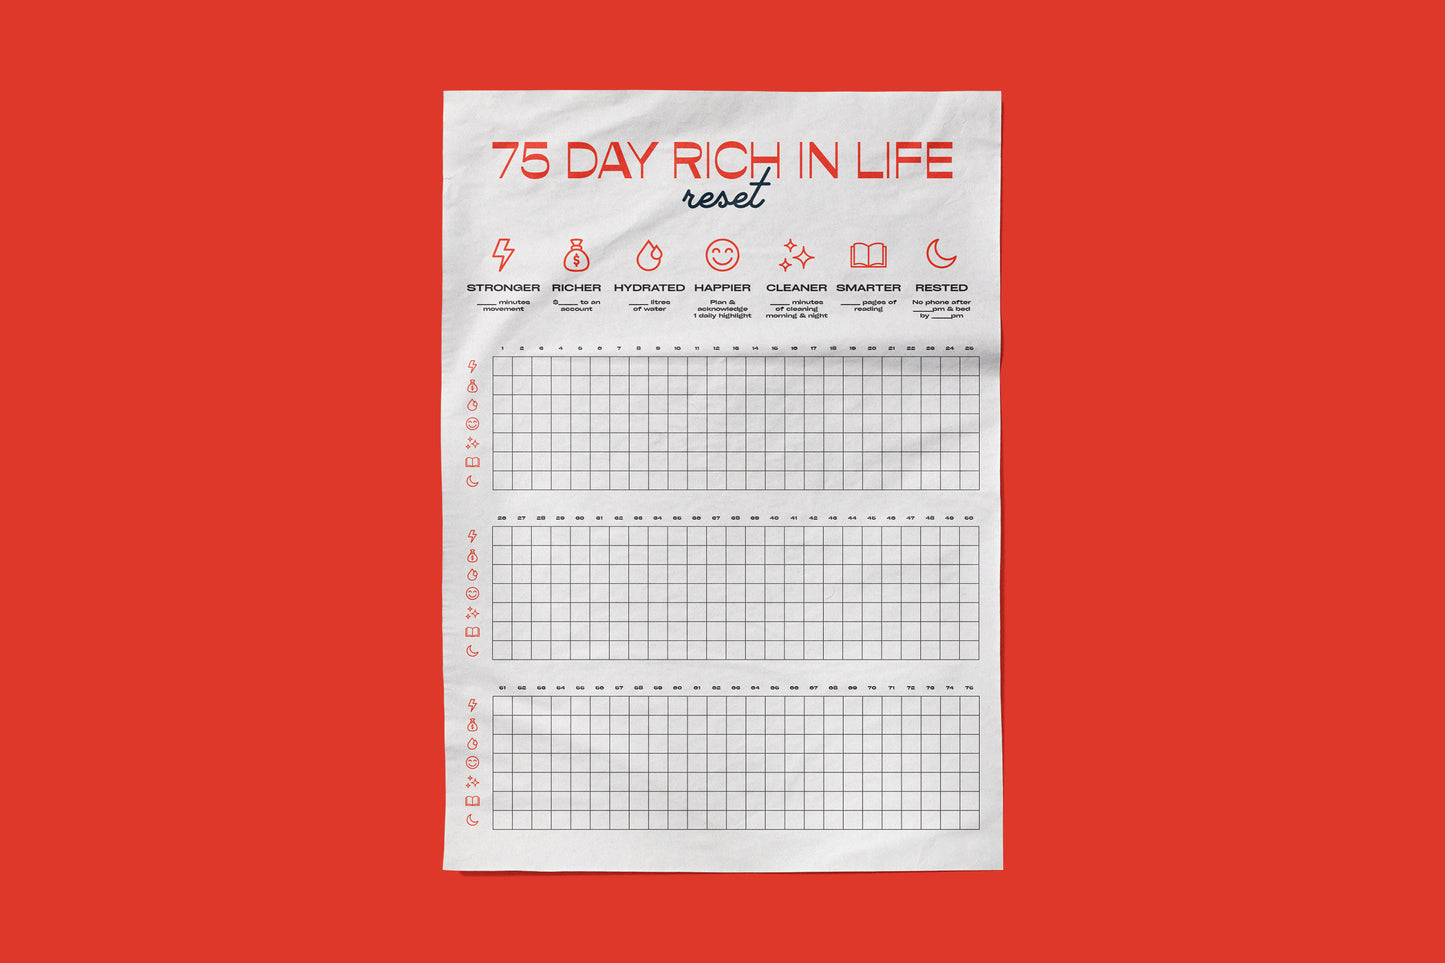 The Rich In Life 75 Day Reset [DIGITAL POSTER]